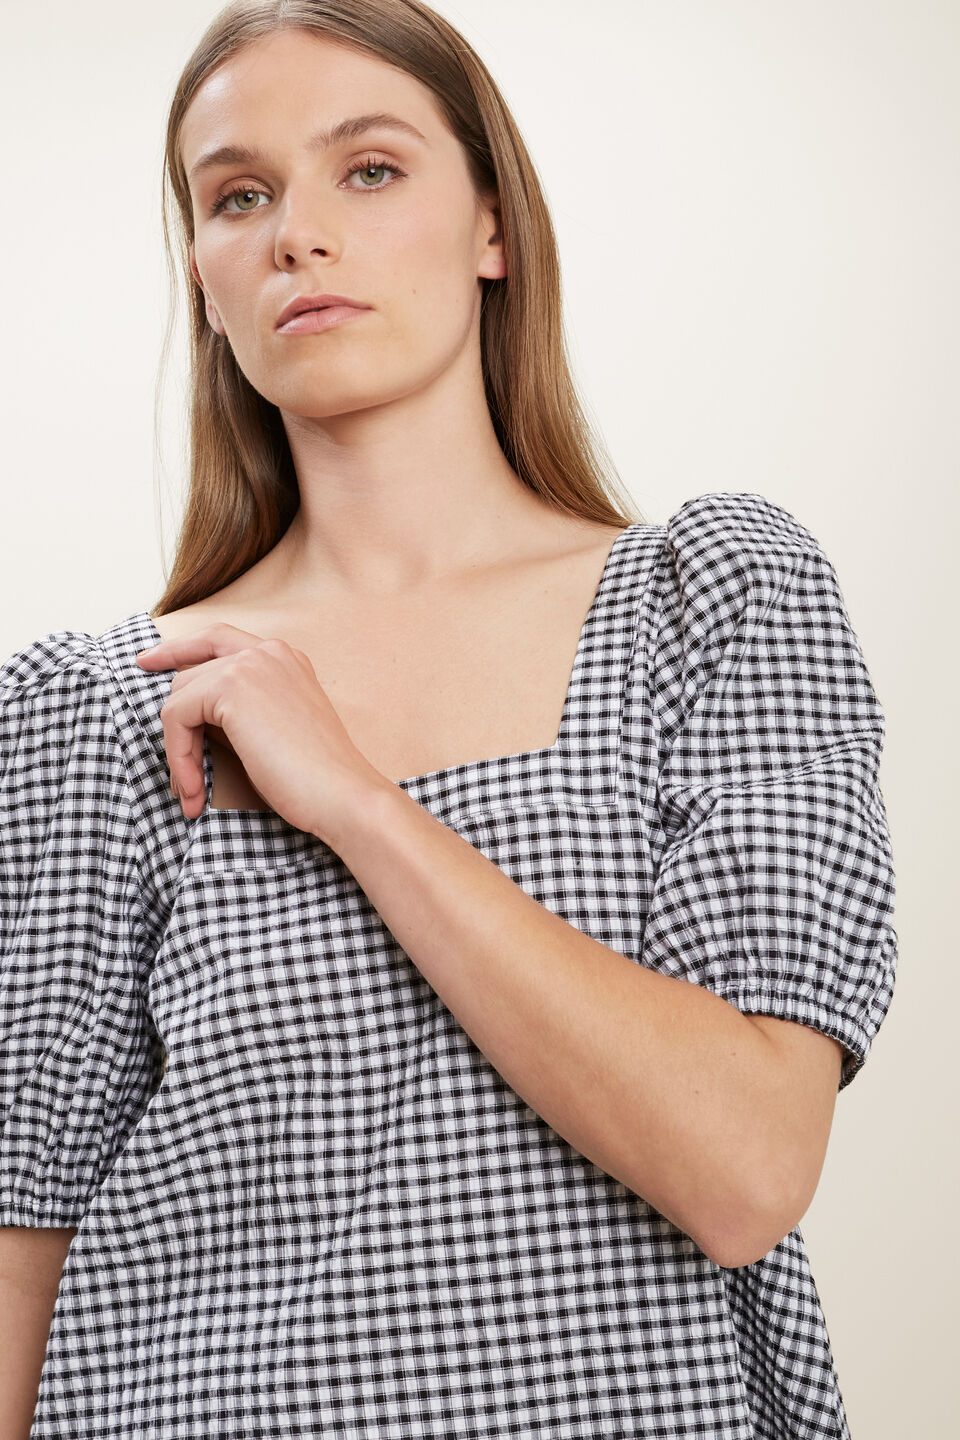 Gingham A-Line Blouse  Mono Gingham